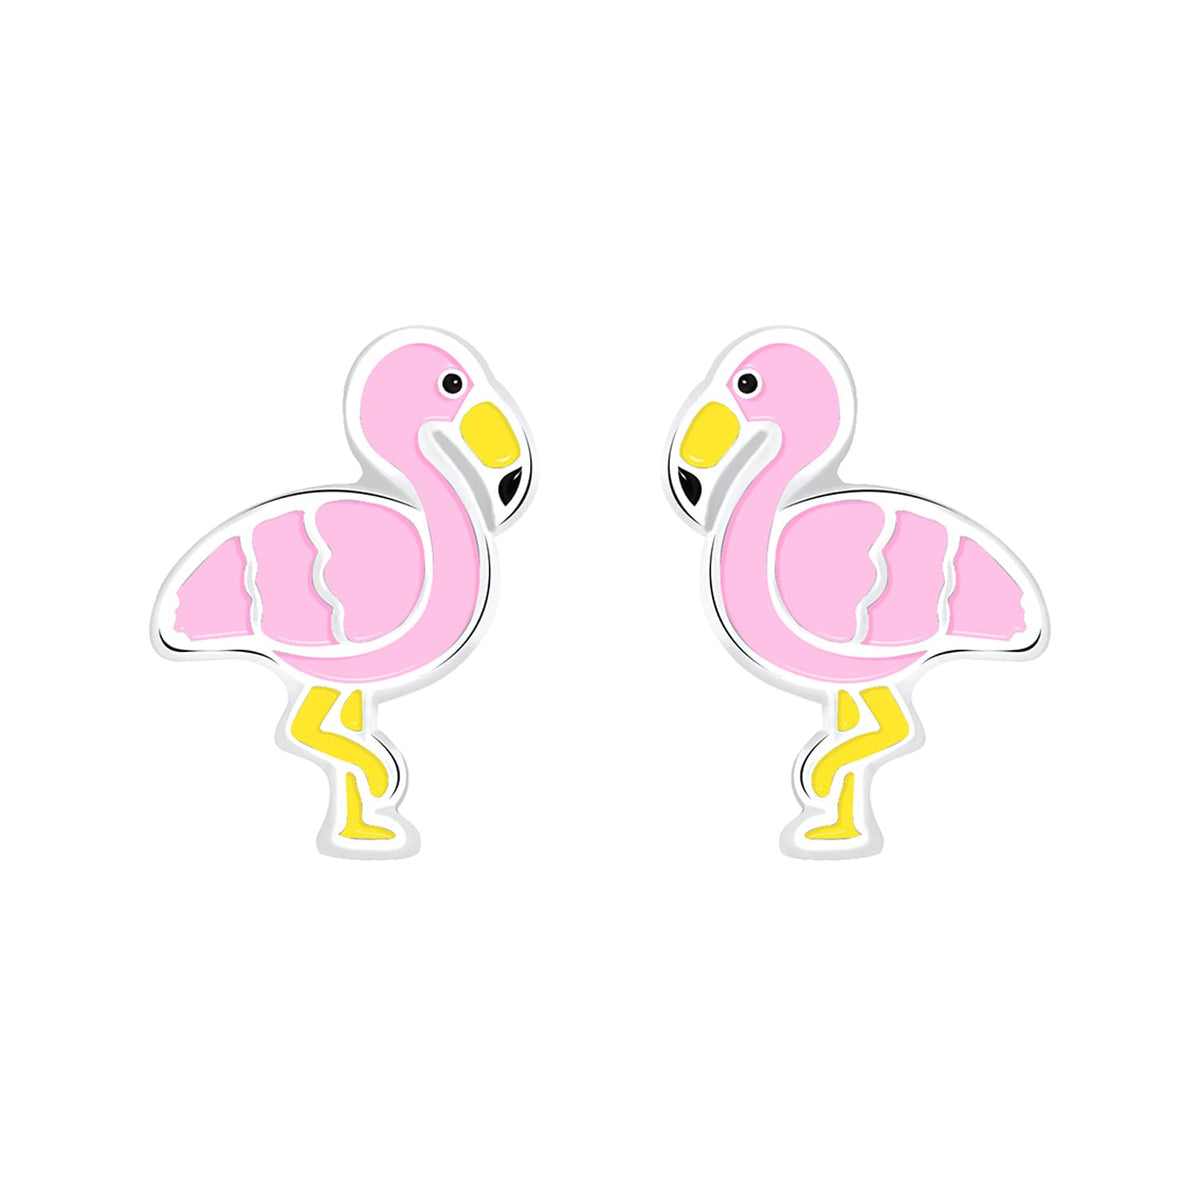 Raajsi by Yellow Chimes 925 Sterling Silver Stud Earring for Girls & Kids Melbees Kids Collection Flamingo Designed |Birthday Gift for Girls Kids | With Certificate of Authenticity & 6 Month Warranty